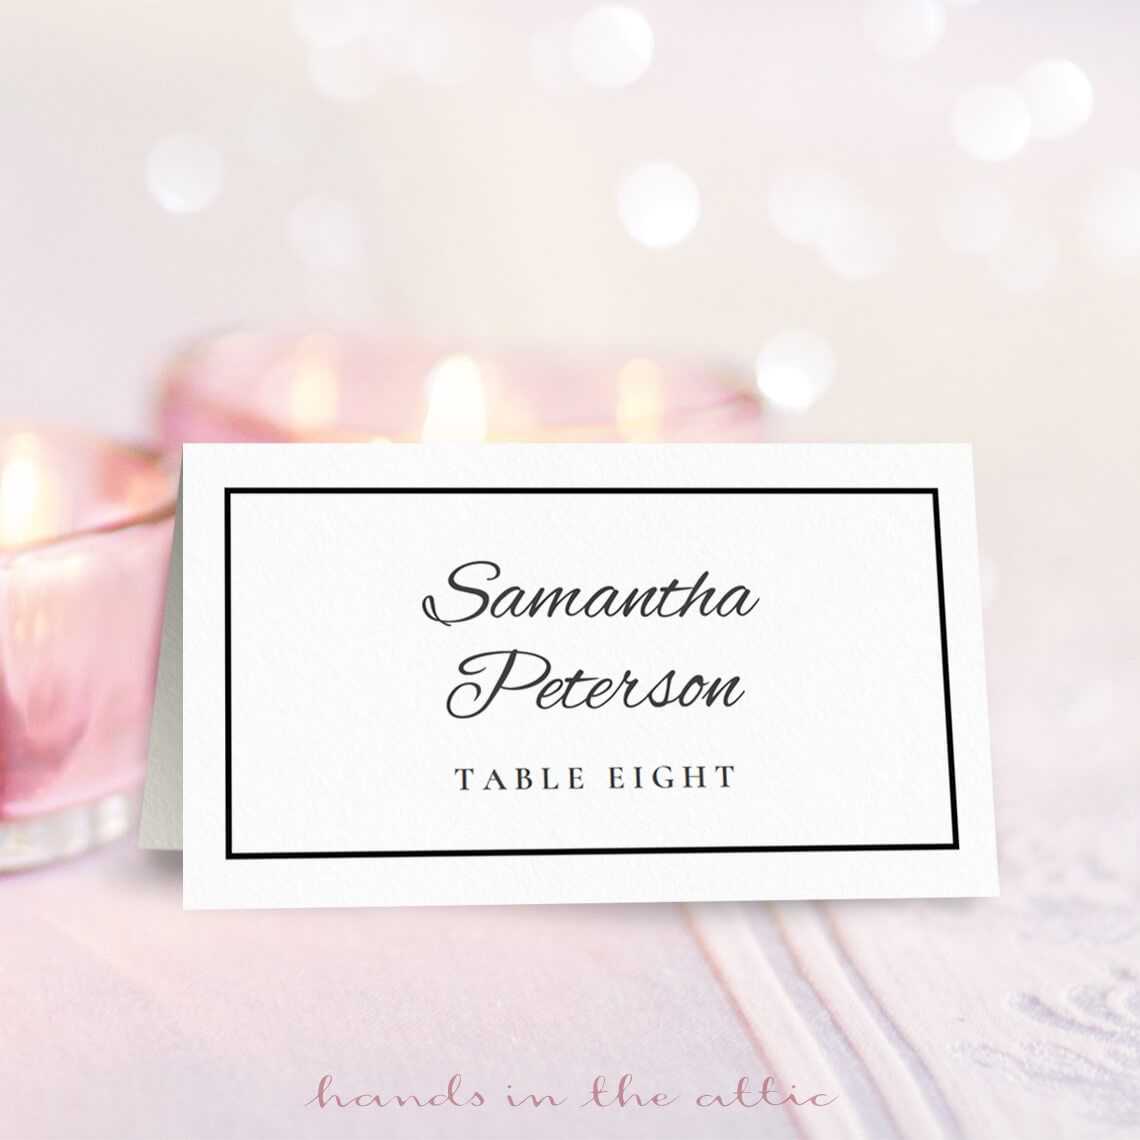 Wedding Place Card Template | Free On Handsintheattic Within Table Name Card Template